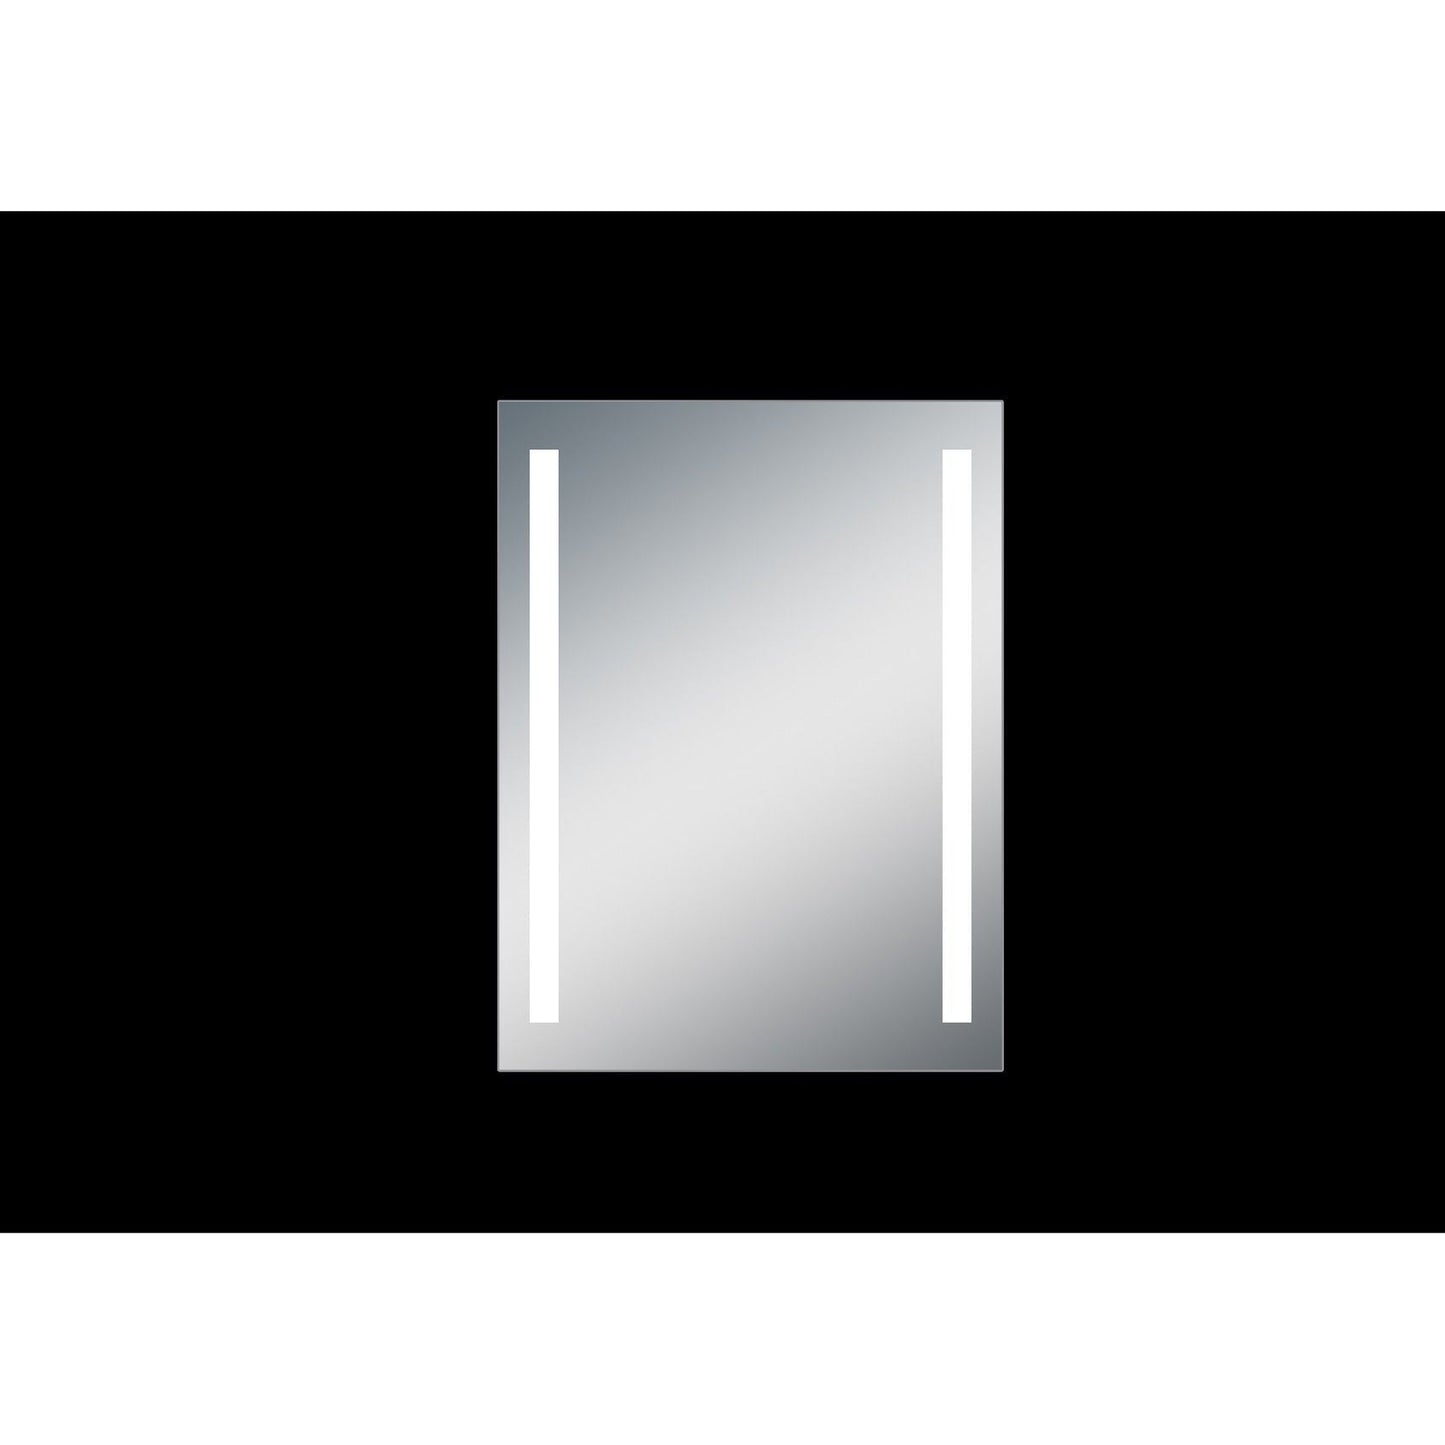 DreamWerks Treviso 20" W x 26" H LED Mirror with Dimmer and Defogger